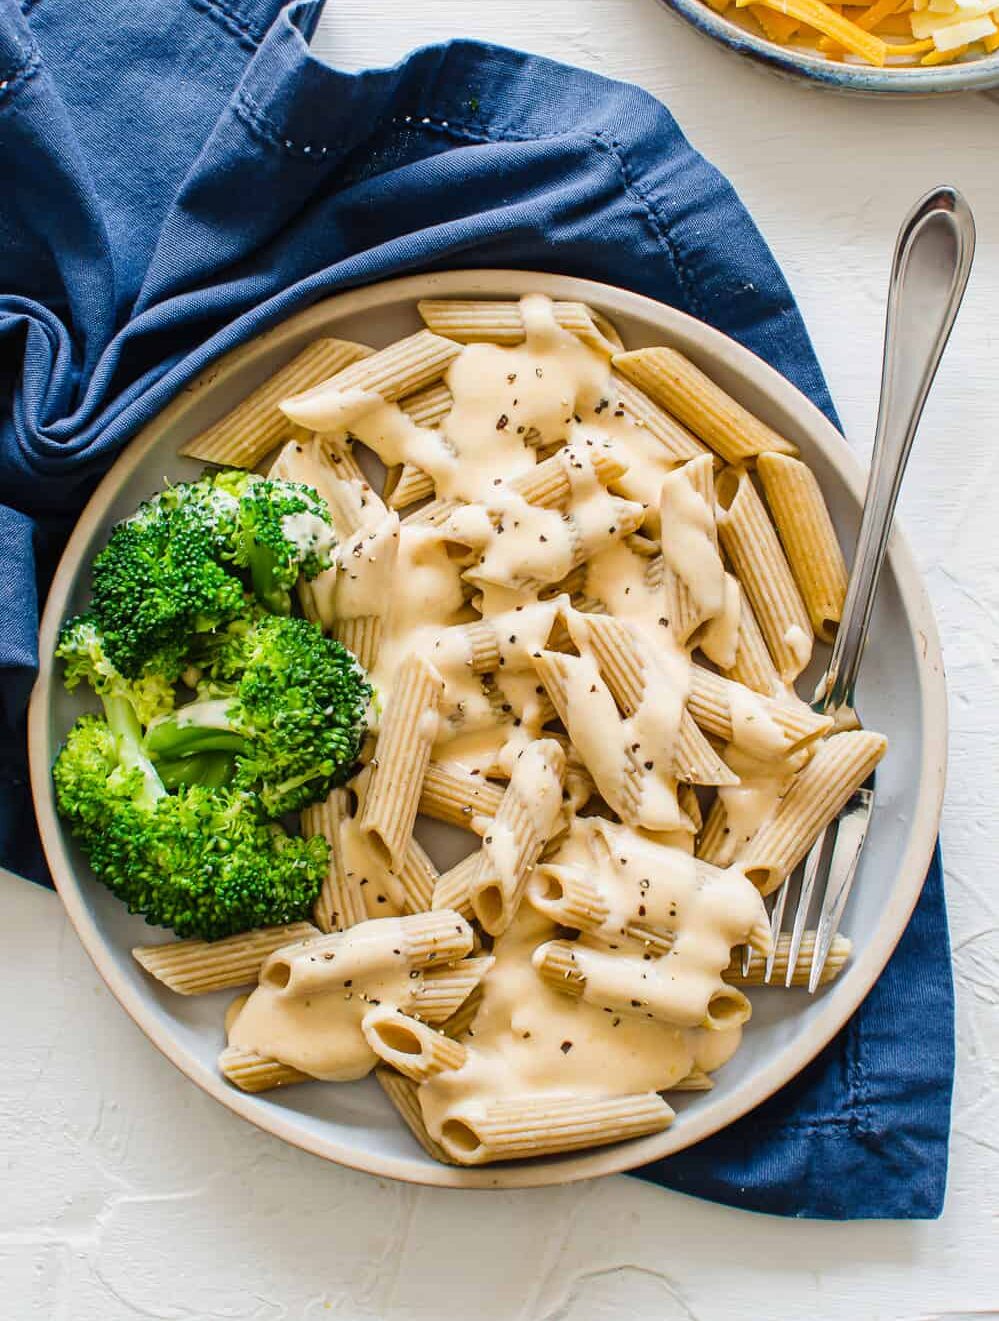 Cheese sauce for pasta with steamed broccoli on the side.